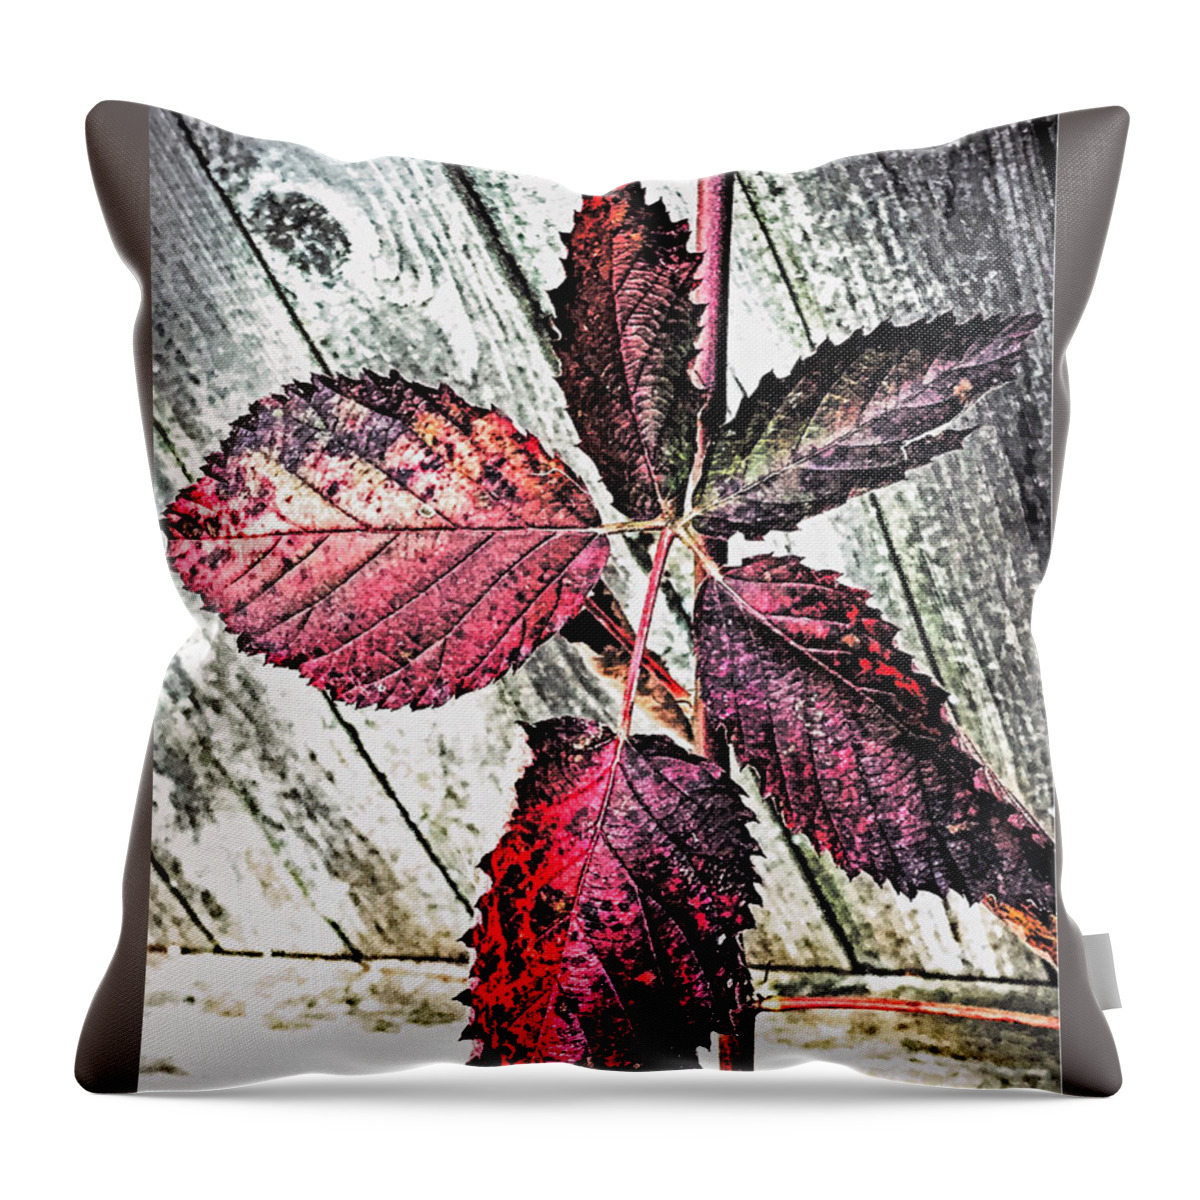 Photograph Throw Pillow featuring the photograph Old And Faded by MaryLee Parker